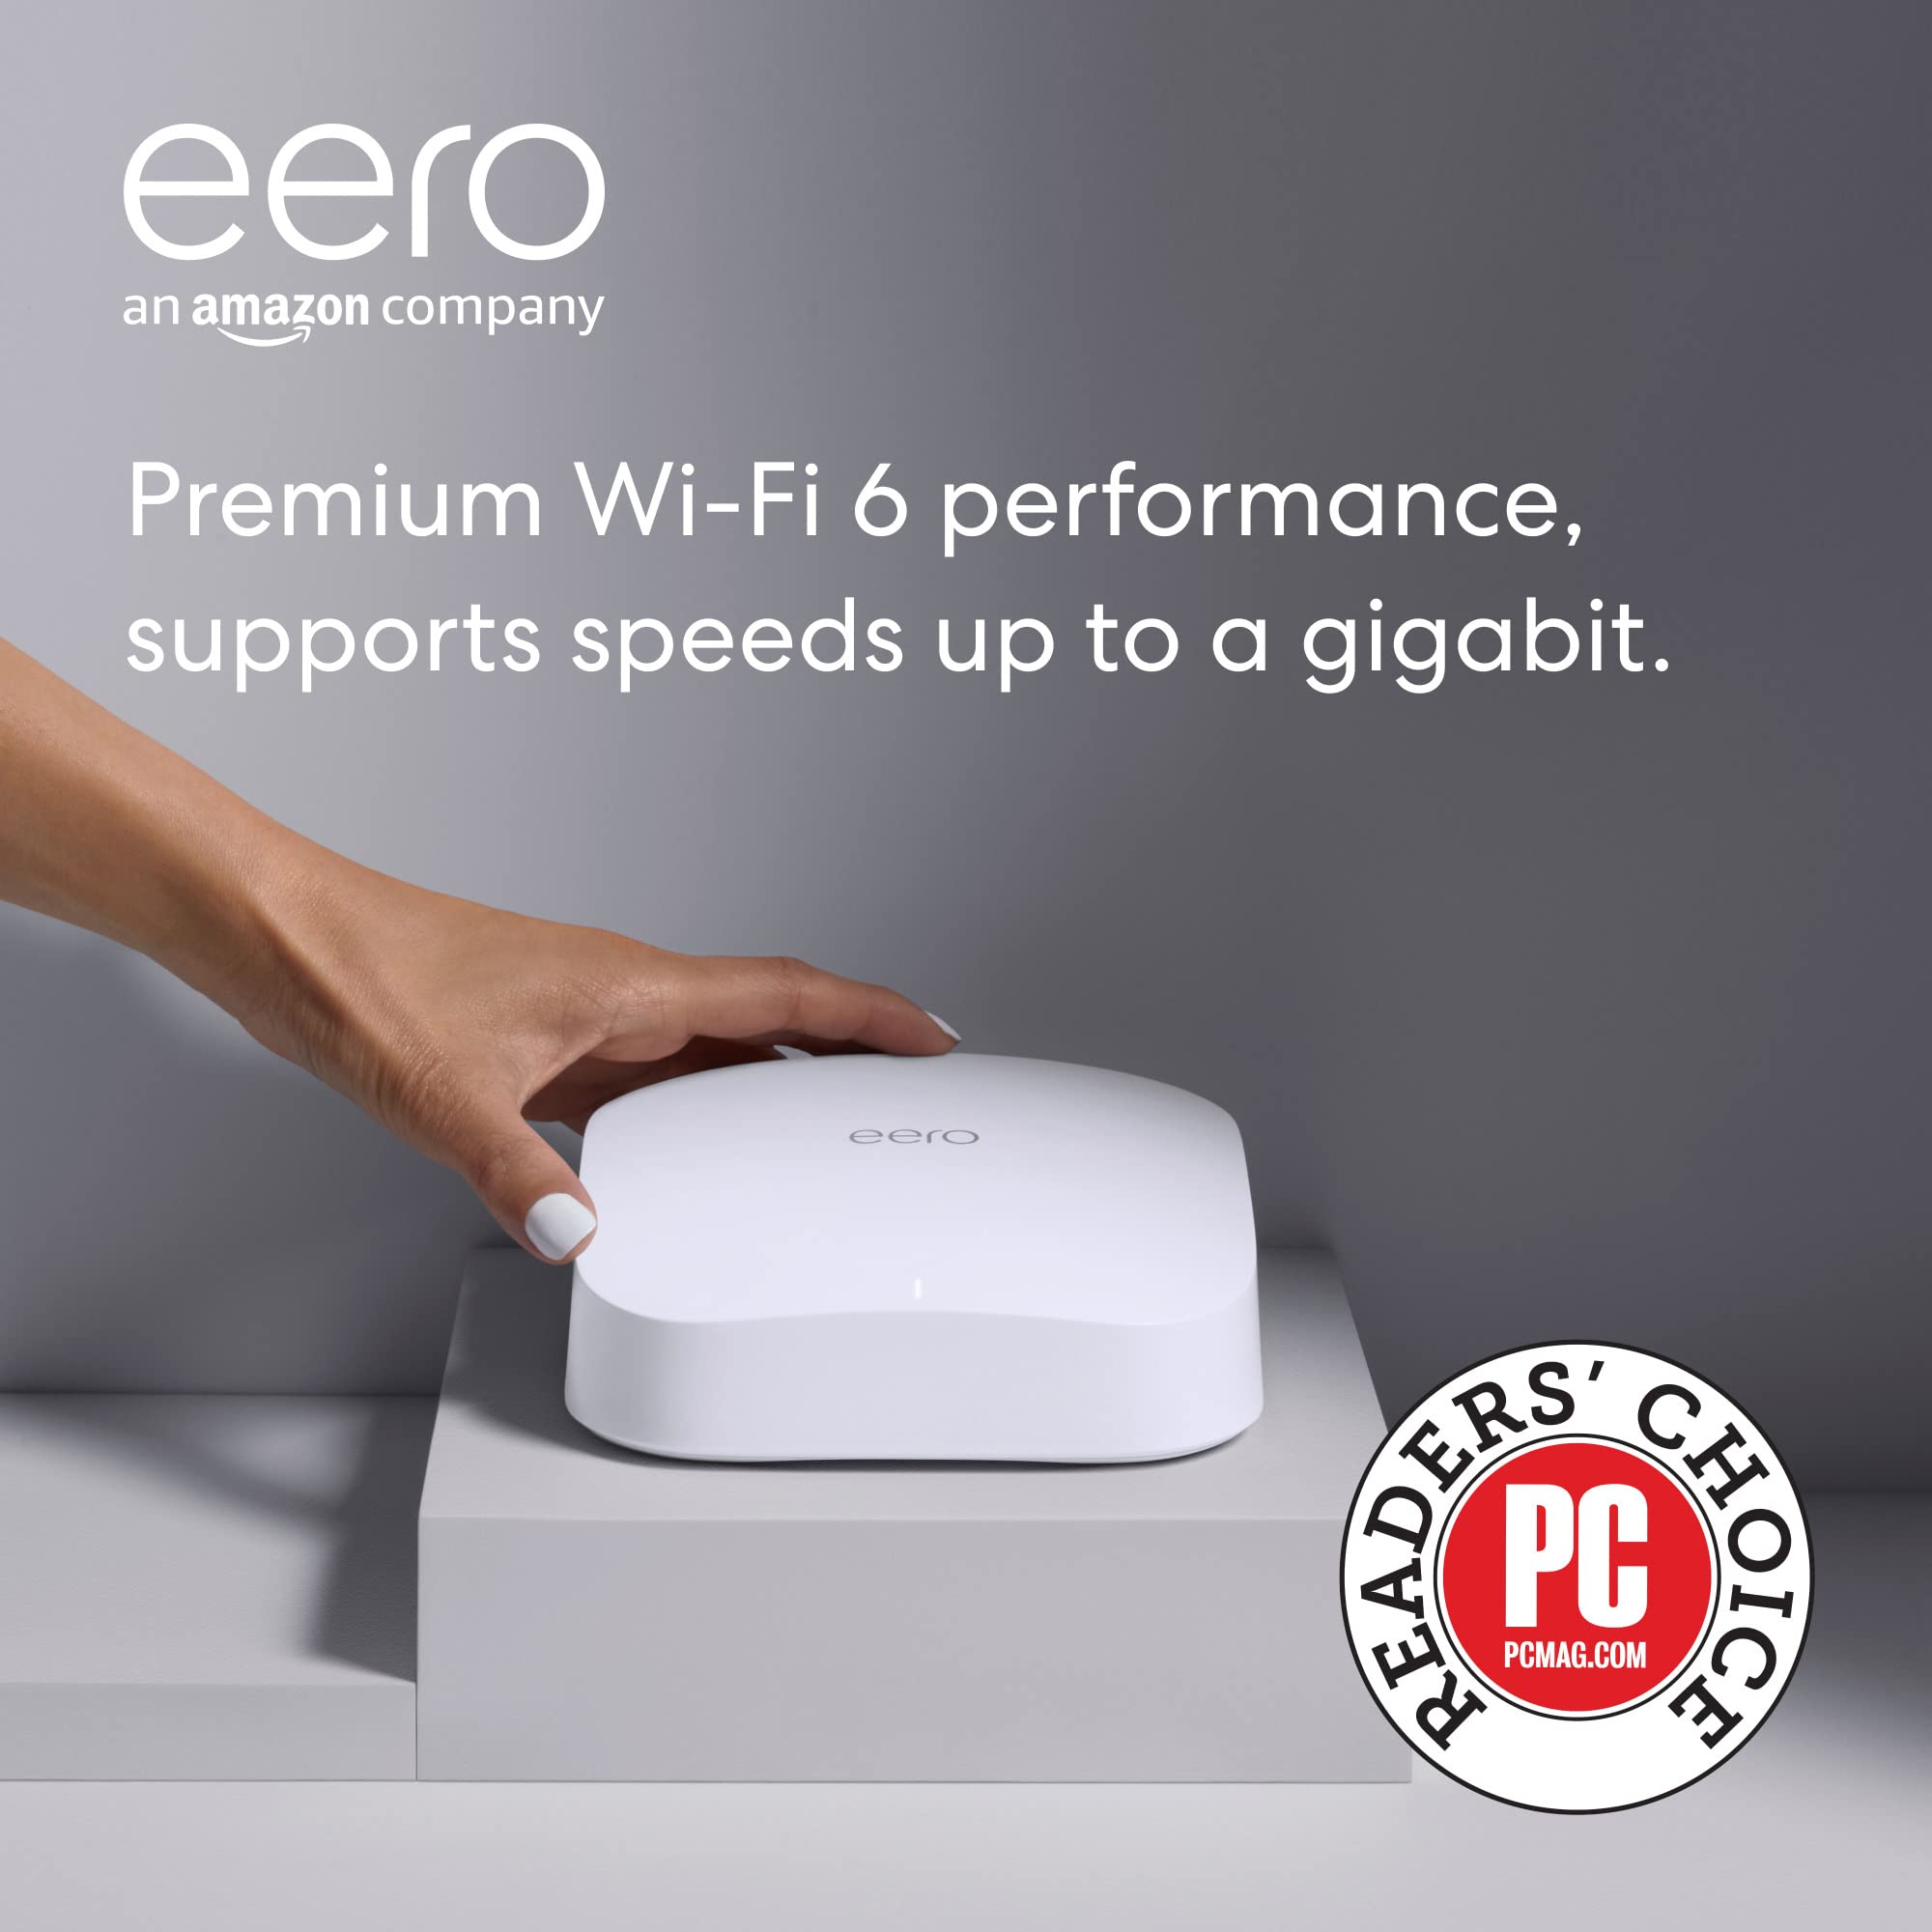 Amazon eero Pro 6 mesh Wi-Fi 6 router | Fast and reliable gigabit speeds | connect 75+ devices | Coverage up to 2,000 sq. ft. | 2020 release